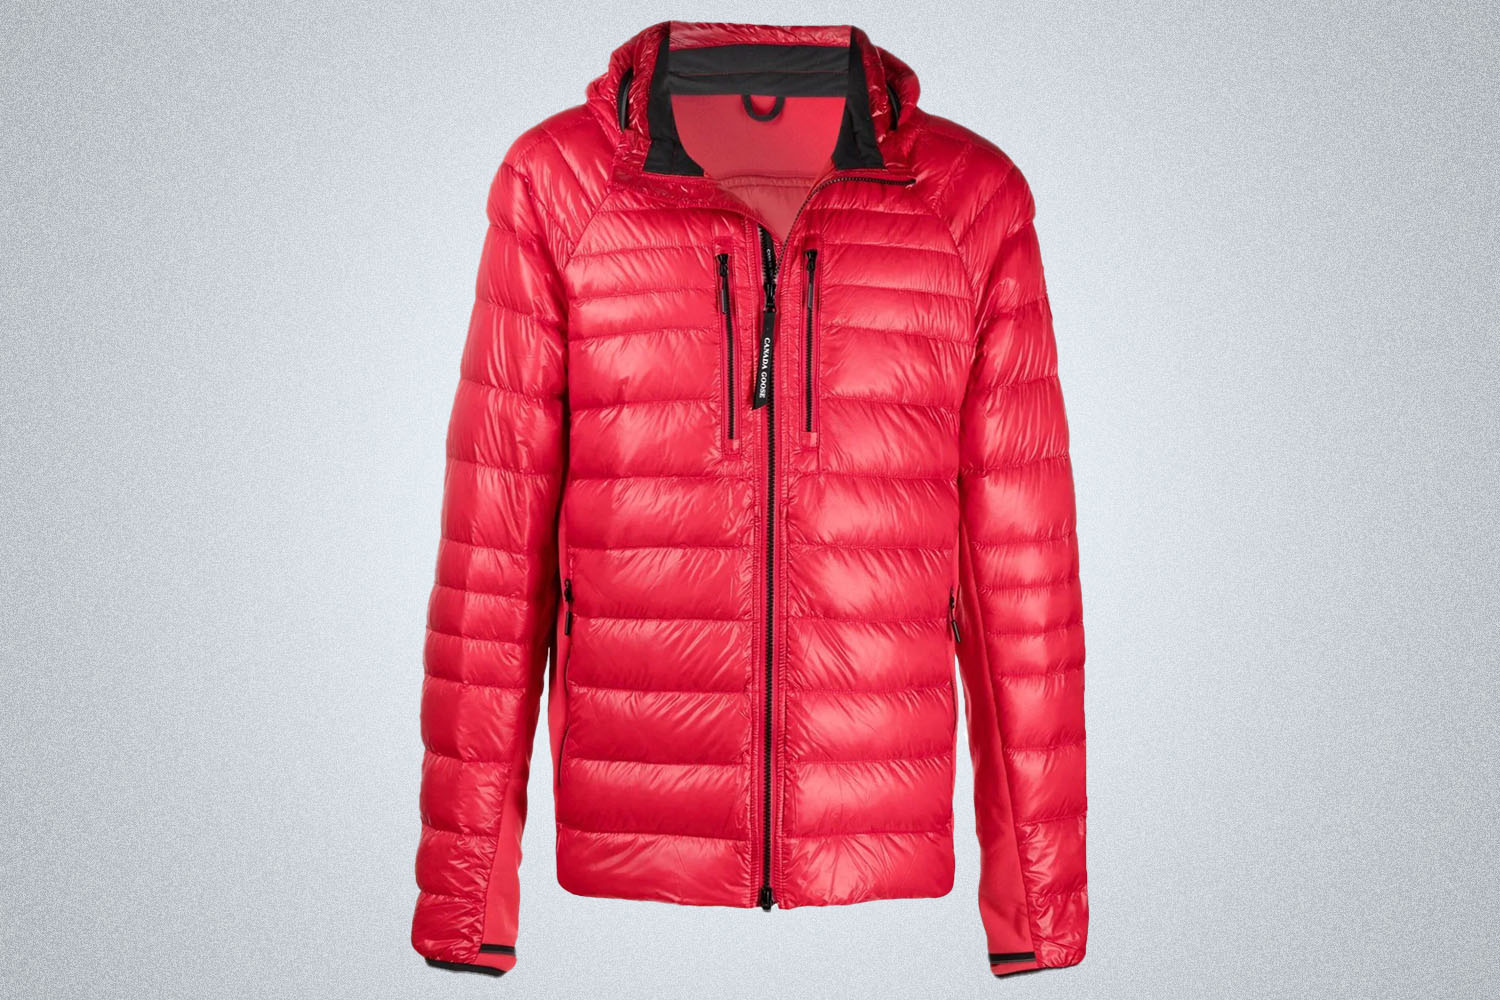 a bright red puffer jacket